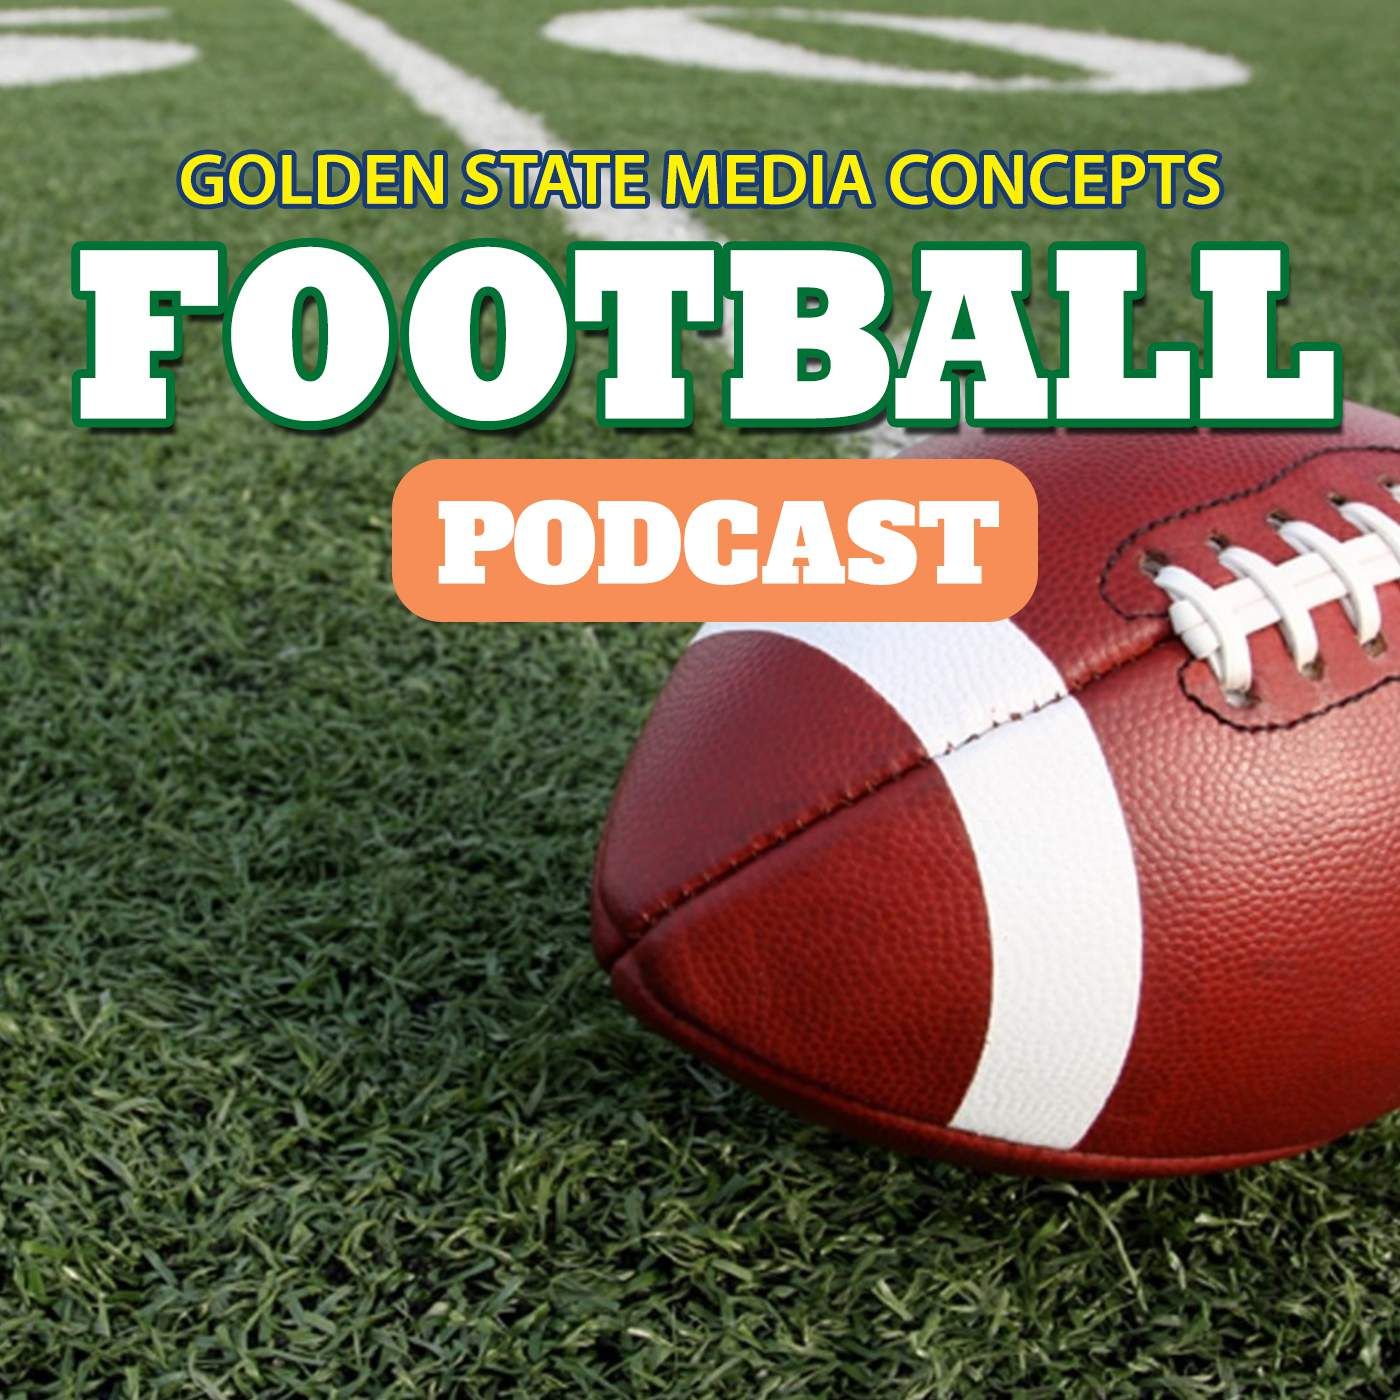 Travis Kelce Becomes NFL's Highest-Paid Tight End | GSMC Football Podcast